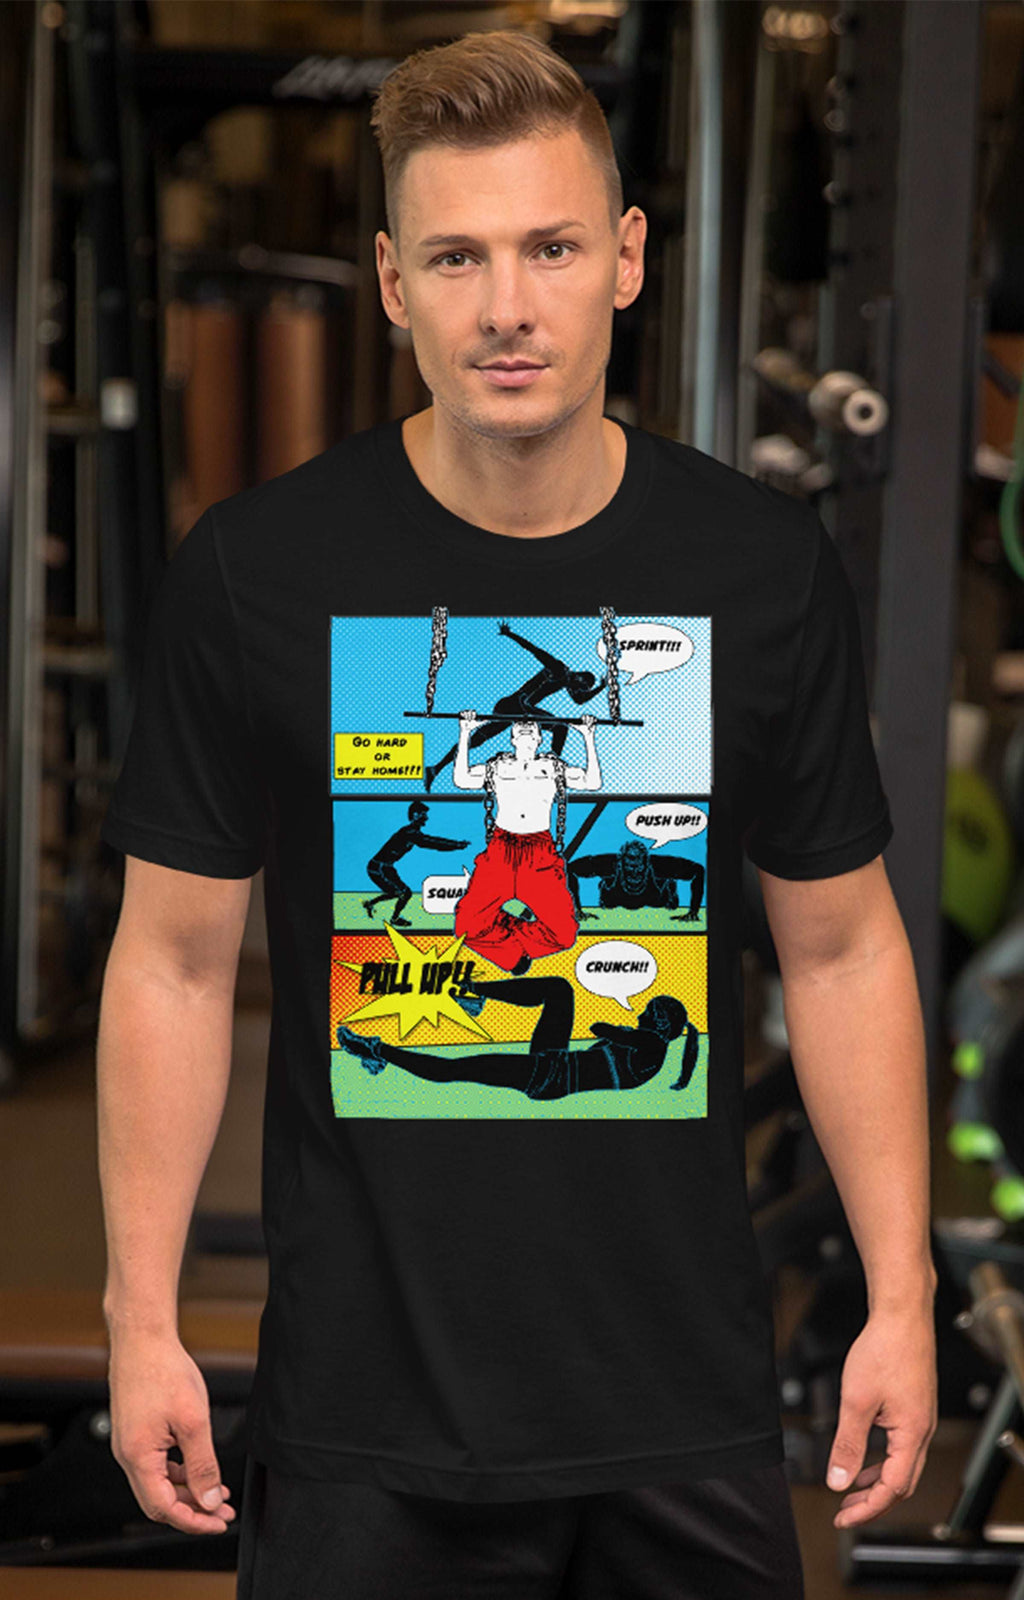 Work out T-shirt